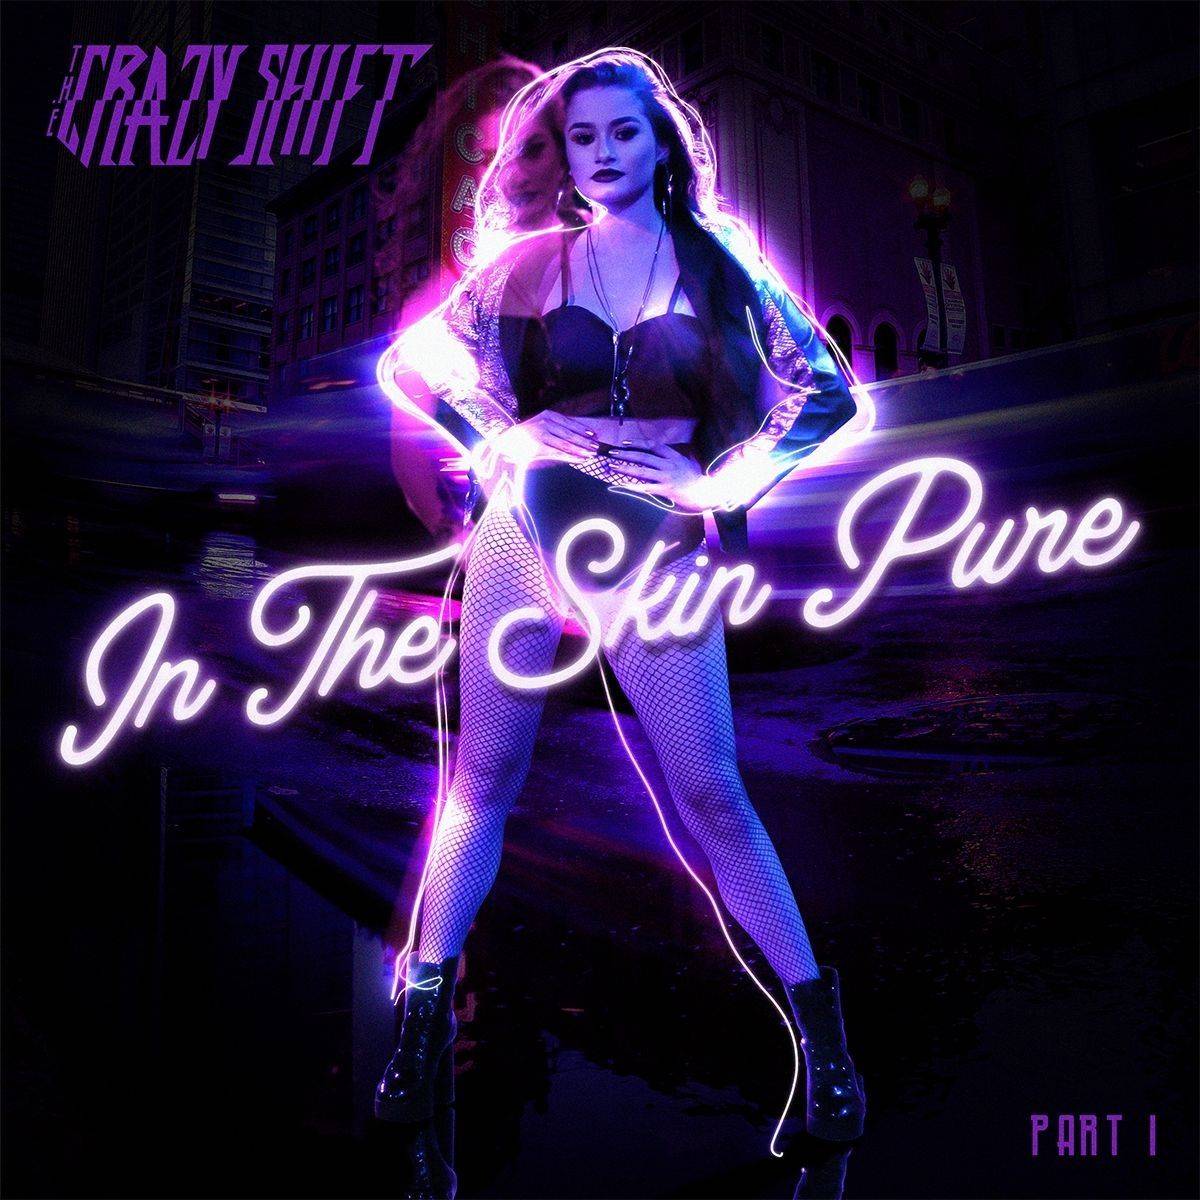 In The Skin Pure, Pt. I (EP)